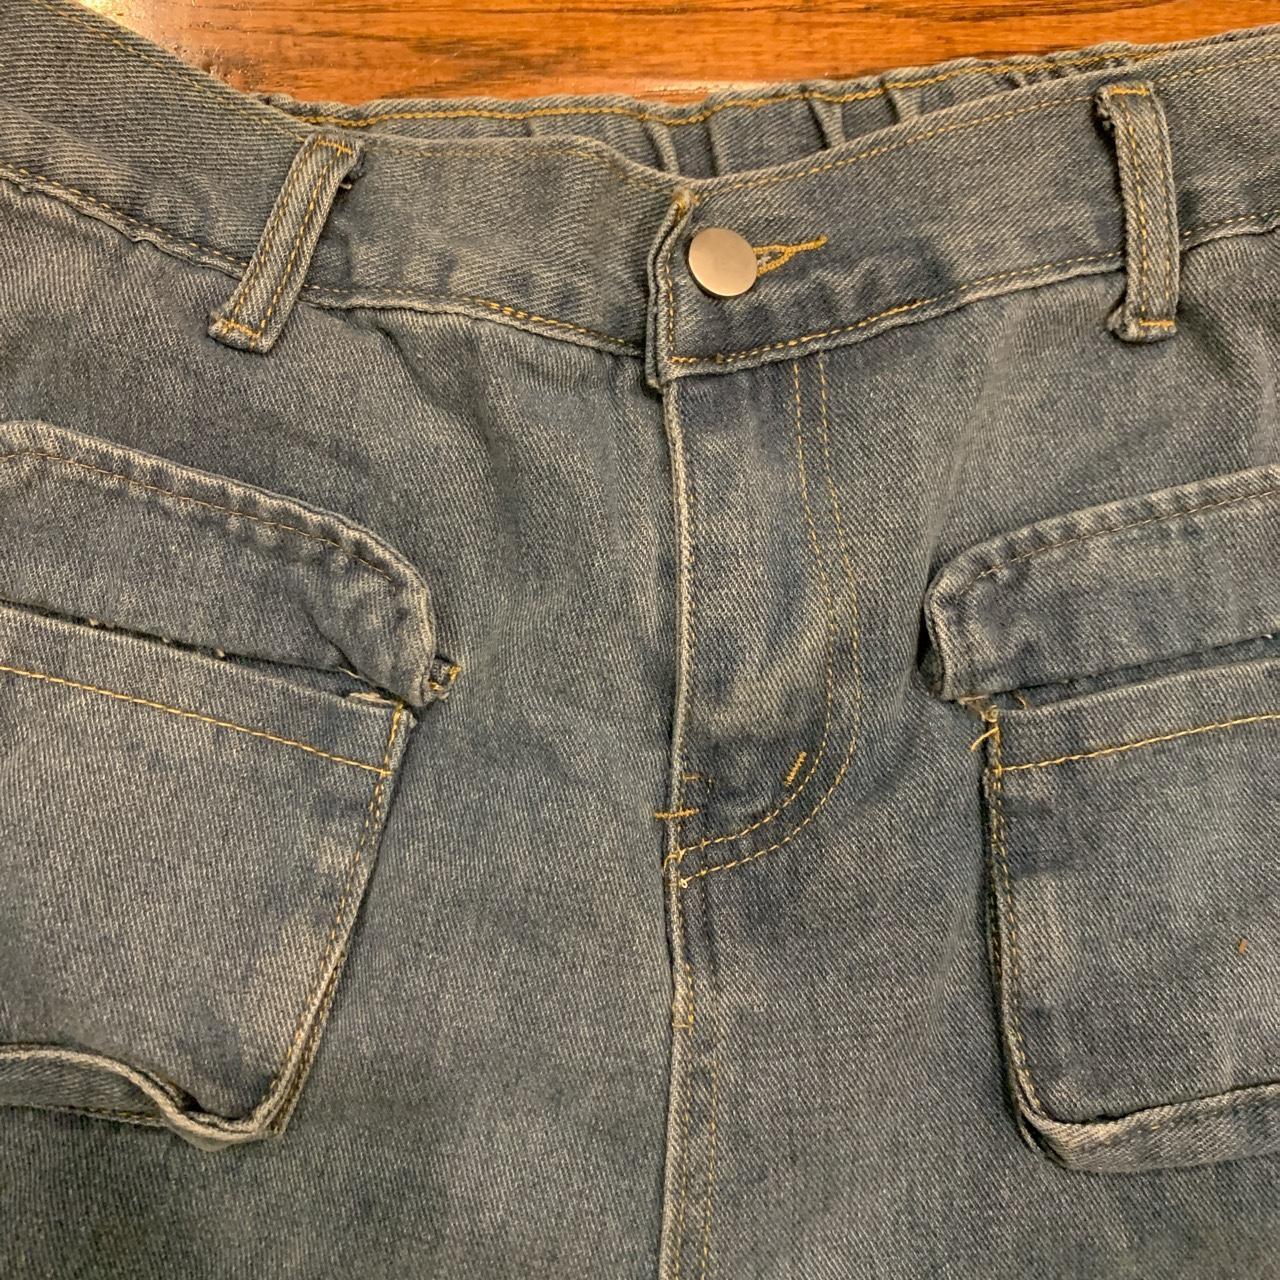 Vintage Style Cargo Jeans Perfect Condition Fits... - Depop